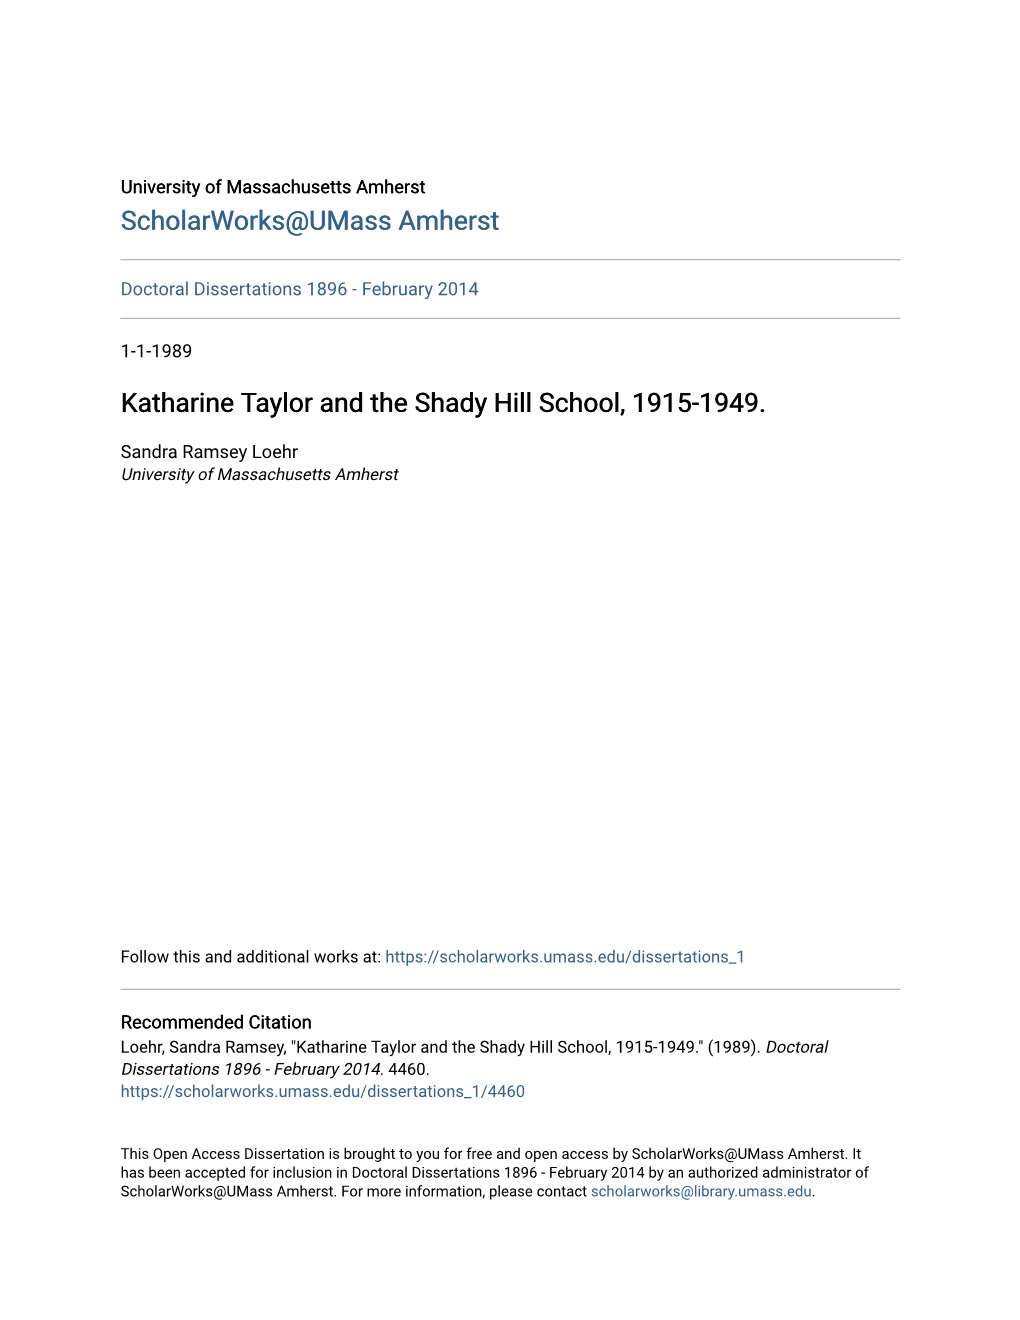 Katharine Taylor and the Shady Hill School, 1915-1949